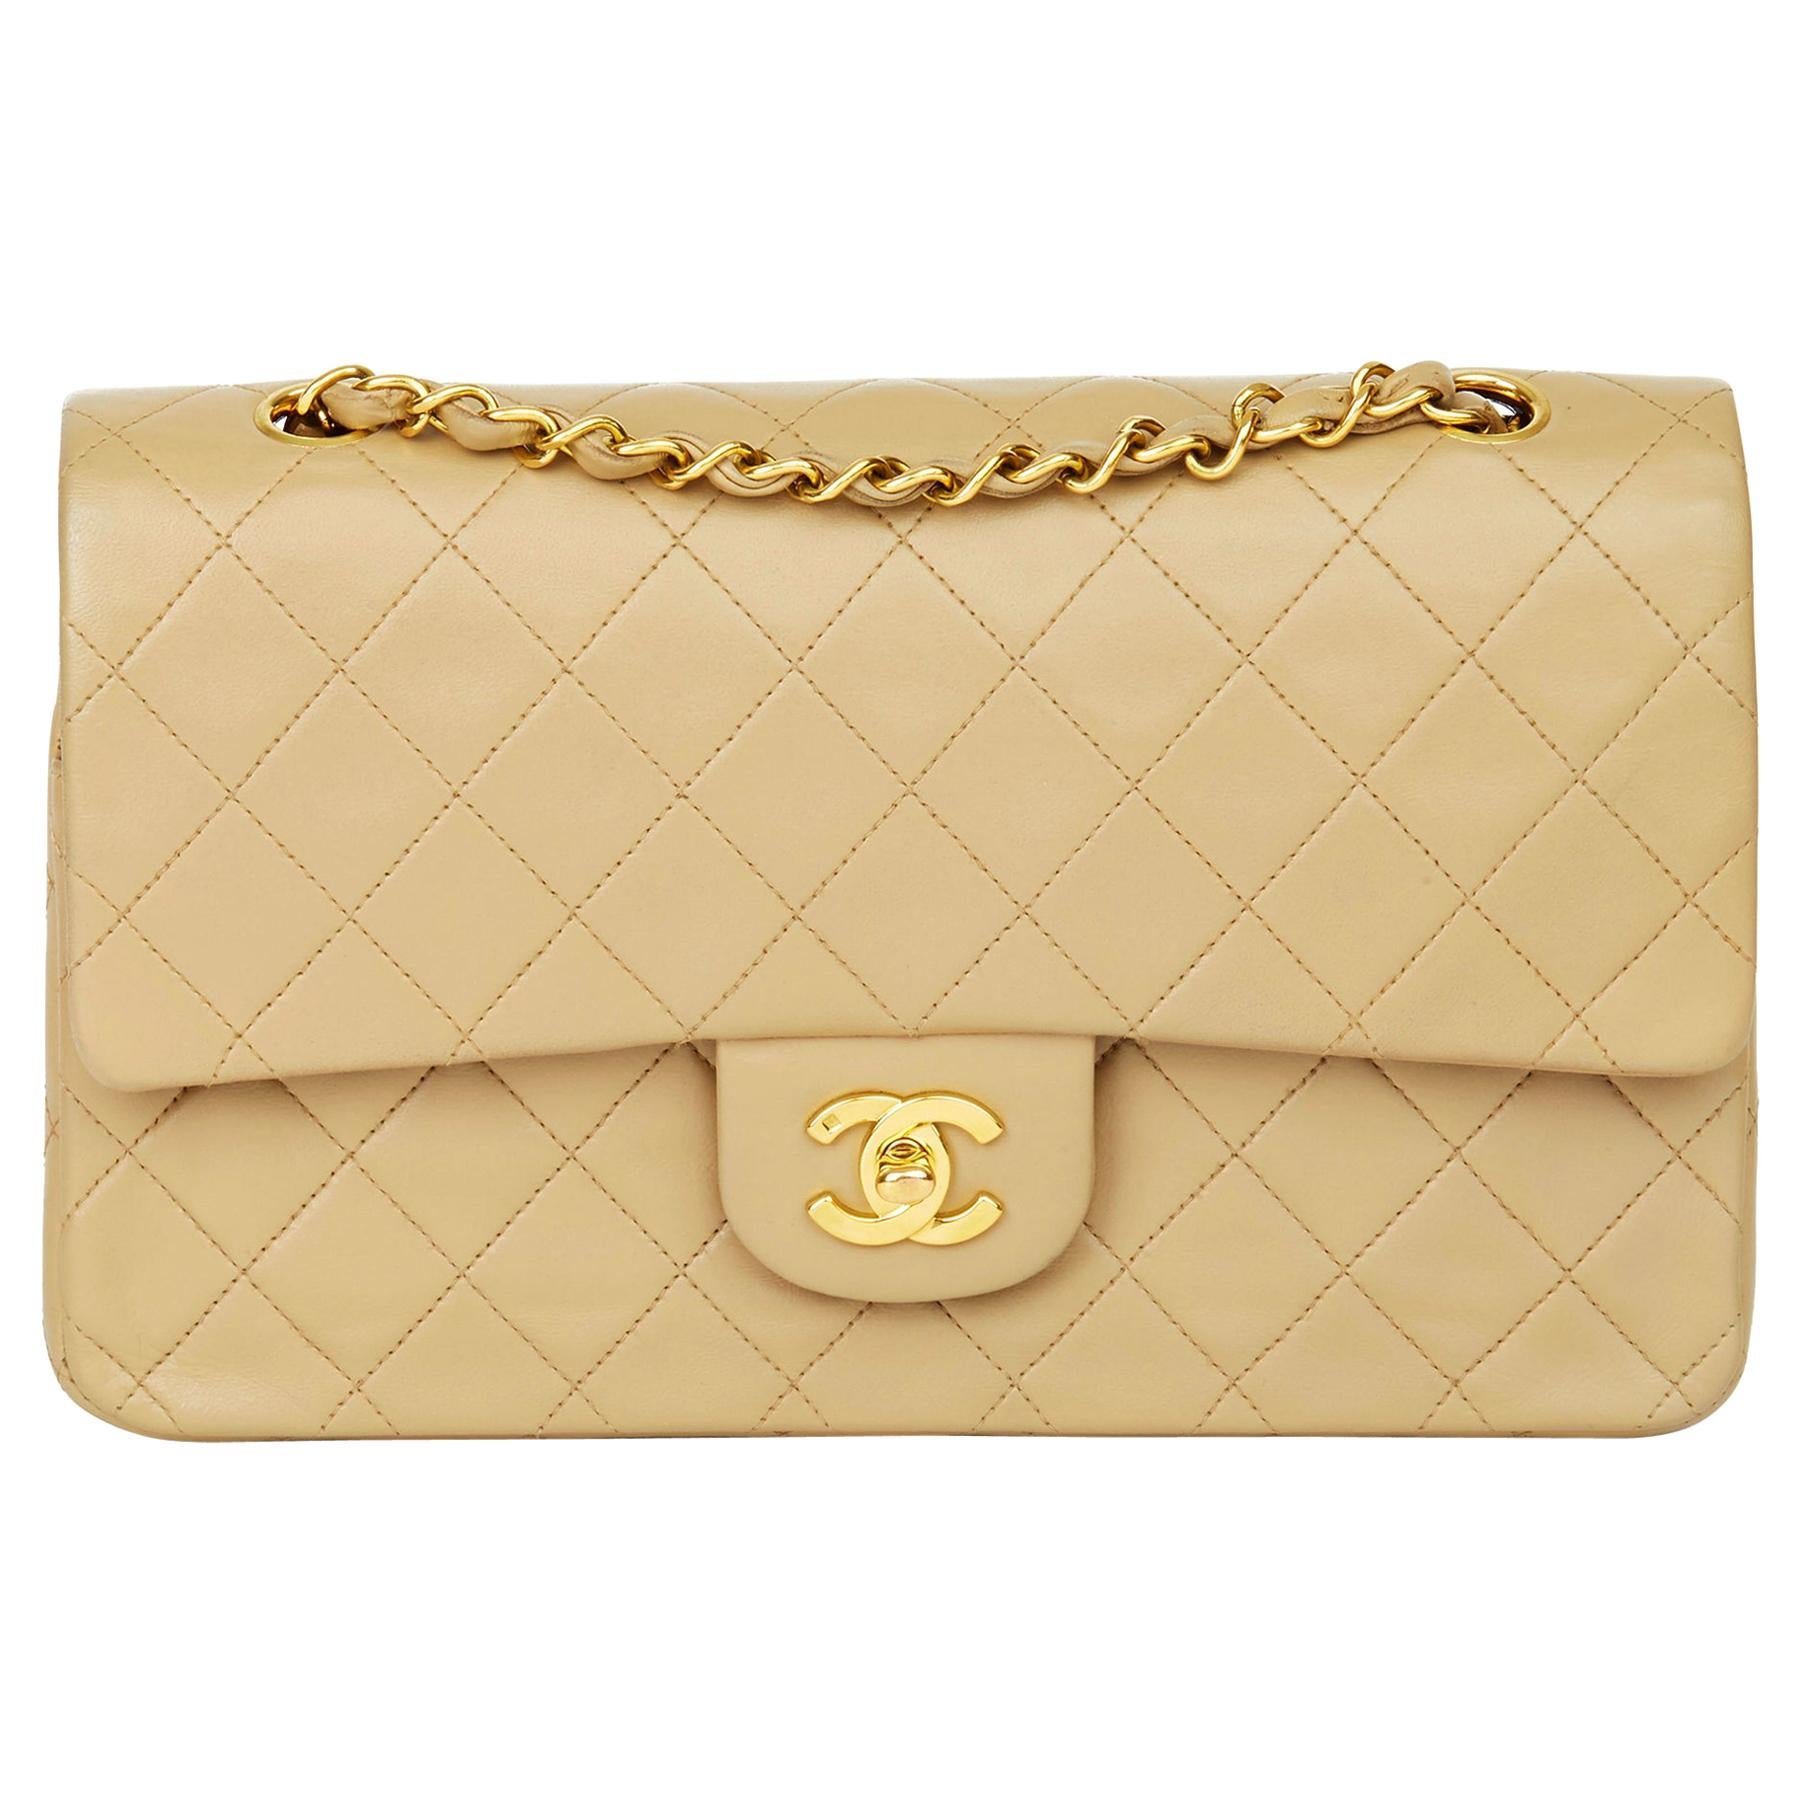 1996 Chanel Beige Quilted Lambskin Vintage Medium Classic Double Flap Bag 